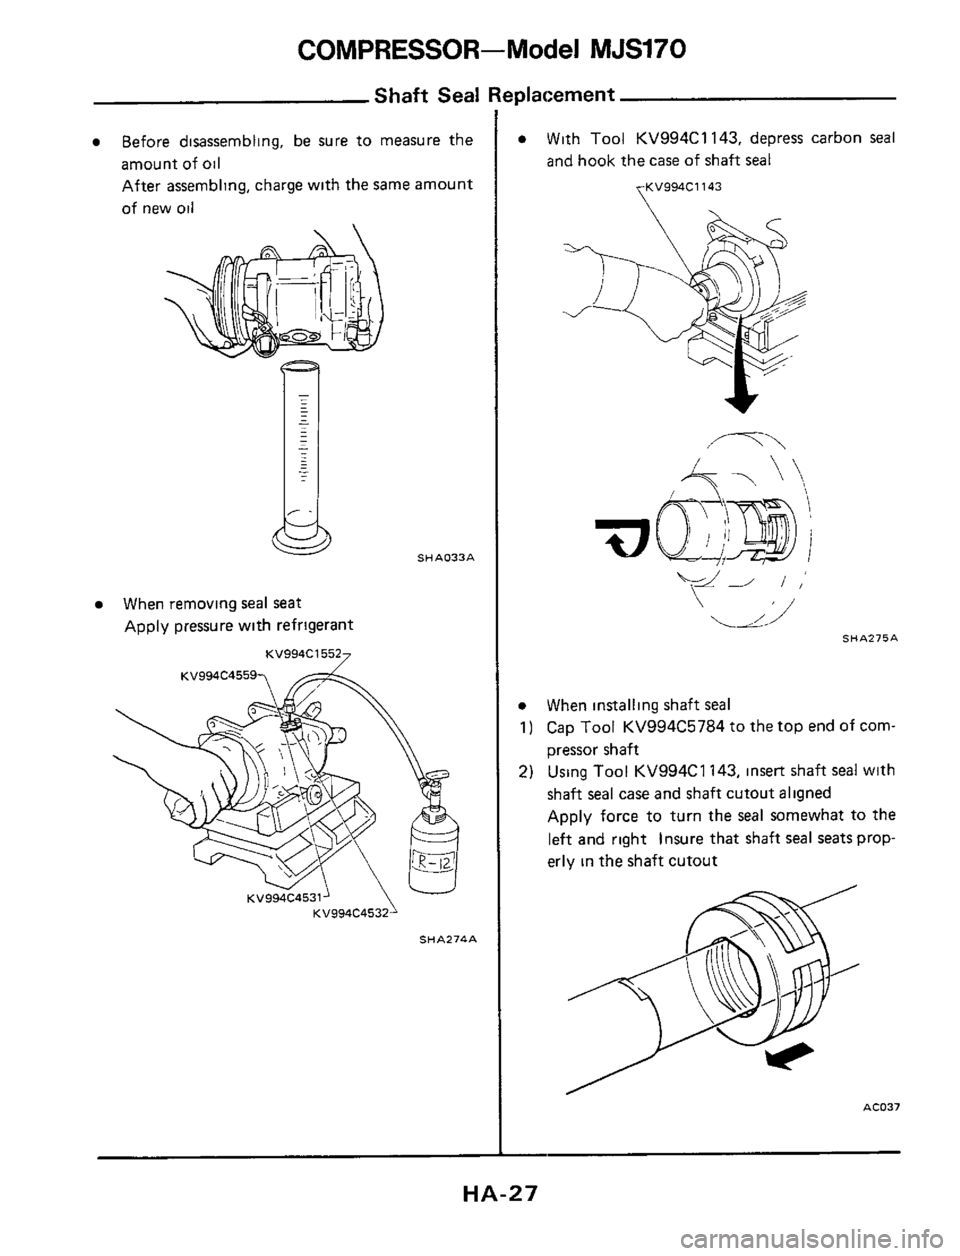 NISSAN 300ZX 1984 Z31 Heather And Air Conditioner Owners Manual COMPRESSOR-Model MJS170 
Shaft Seal Replacement 
Before  disassembling,  be  sure to measure  the 
amount  of 
oil 
After assembling, charge  with the same  amount 
of  new  oil 
When  removing seal s